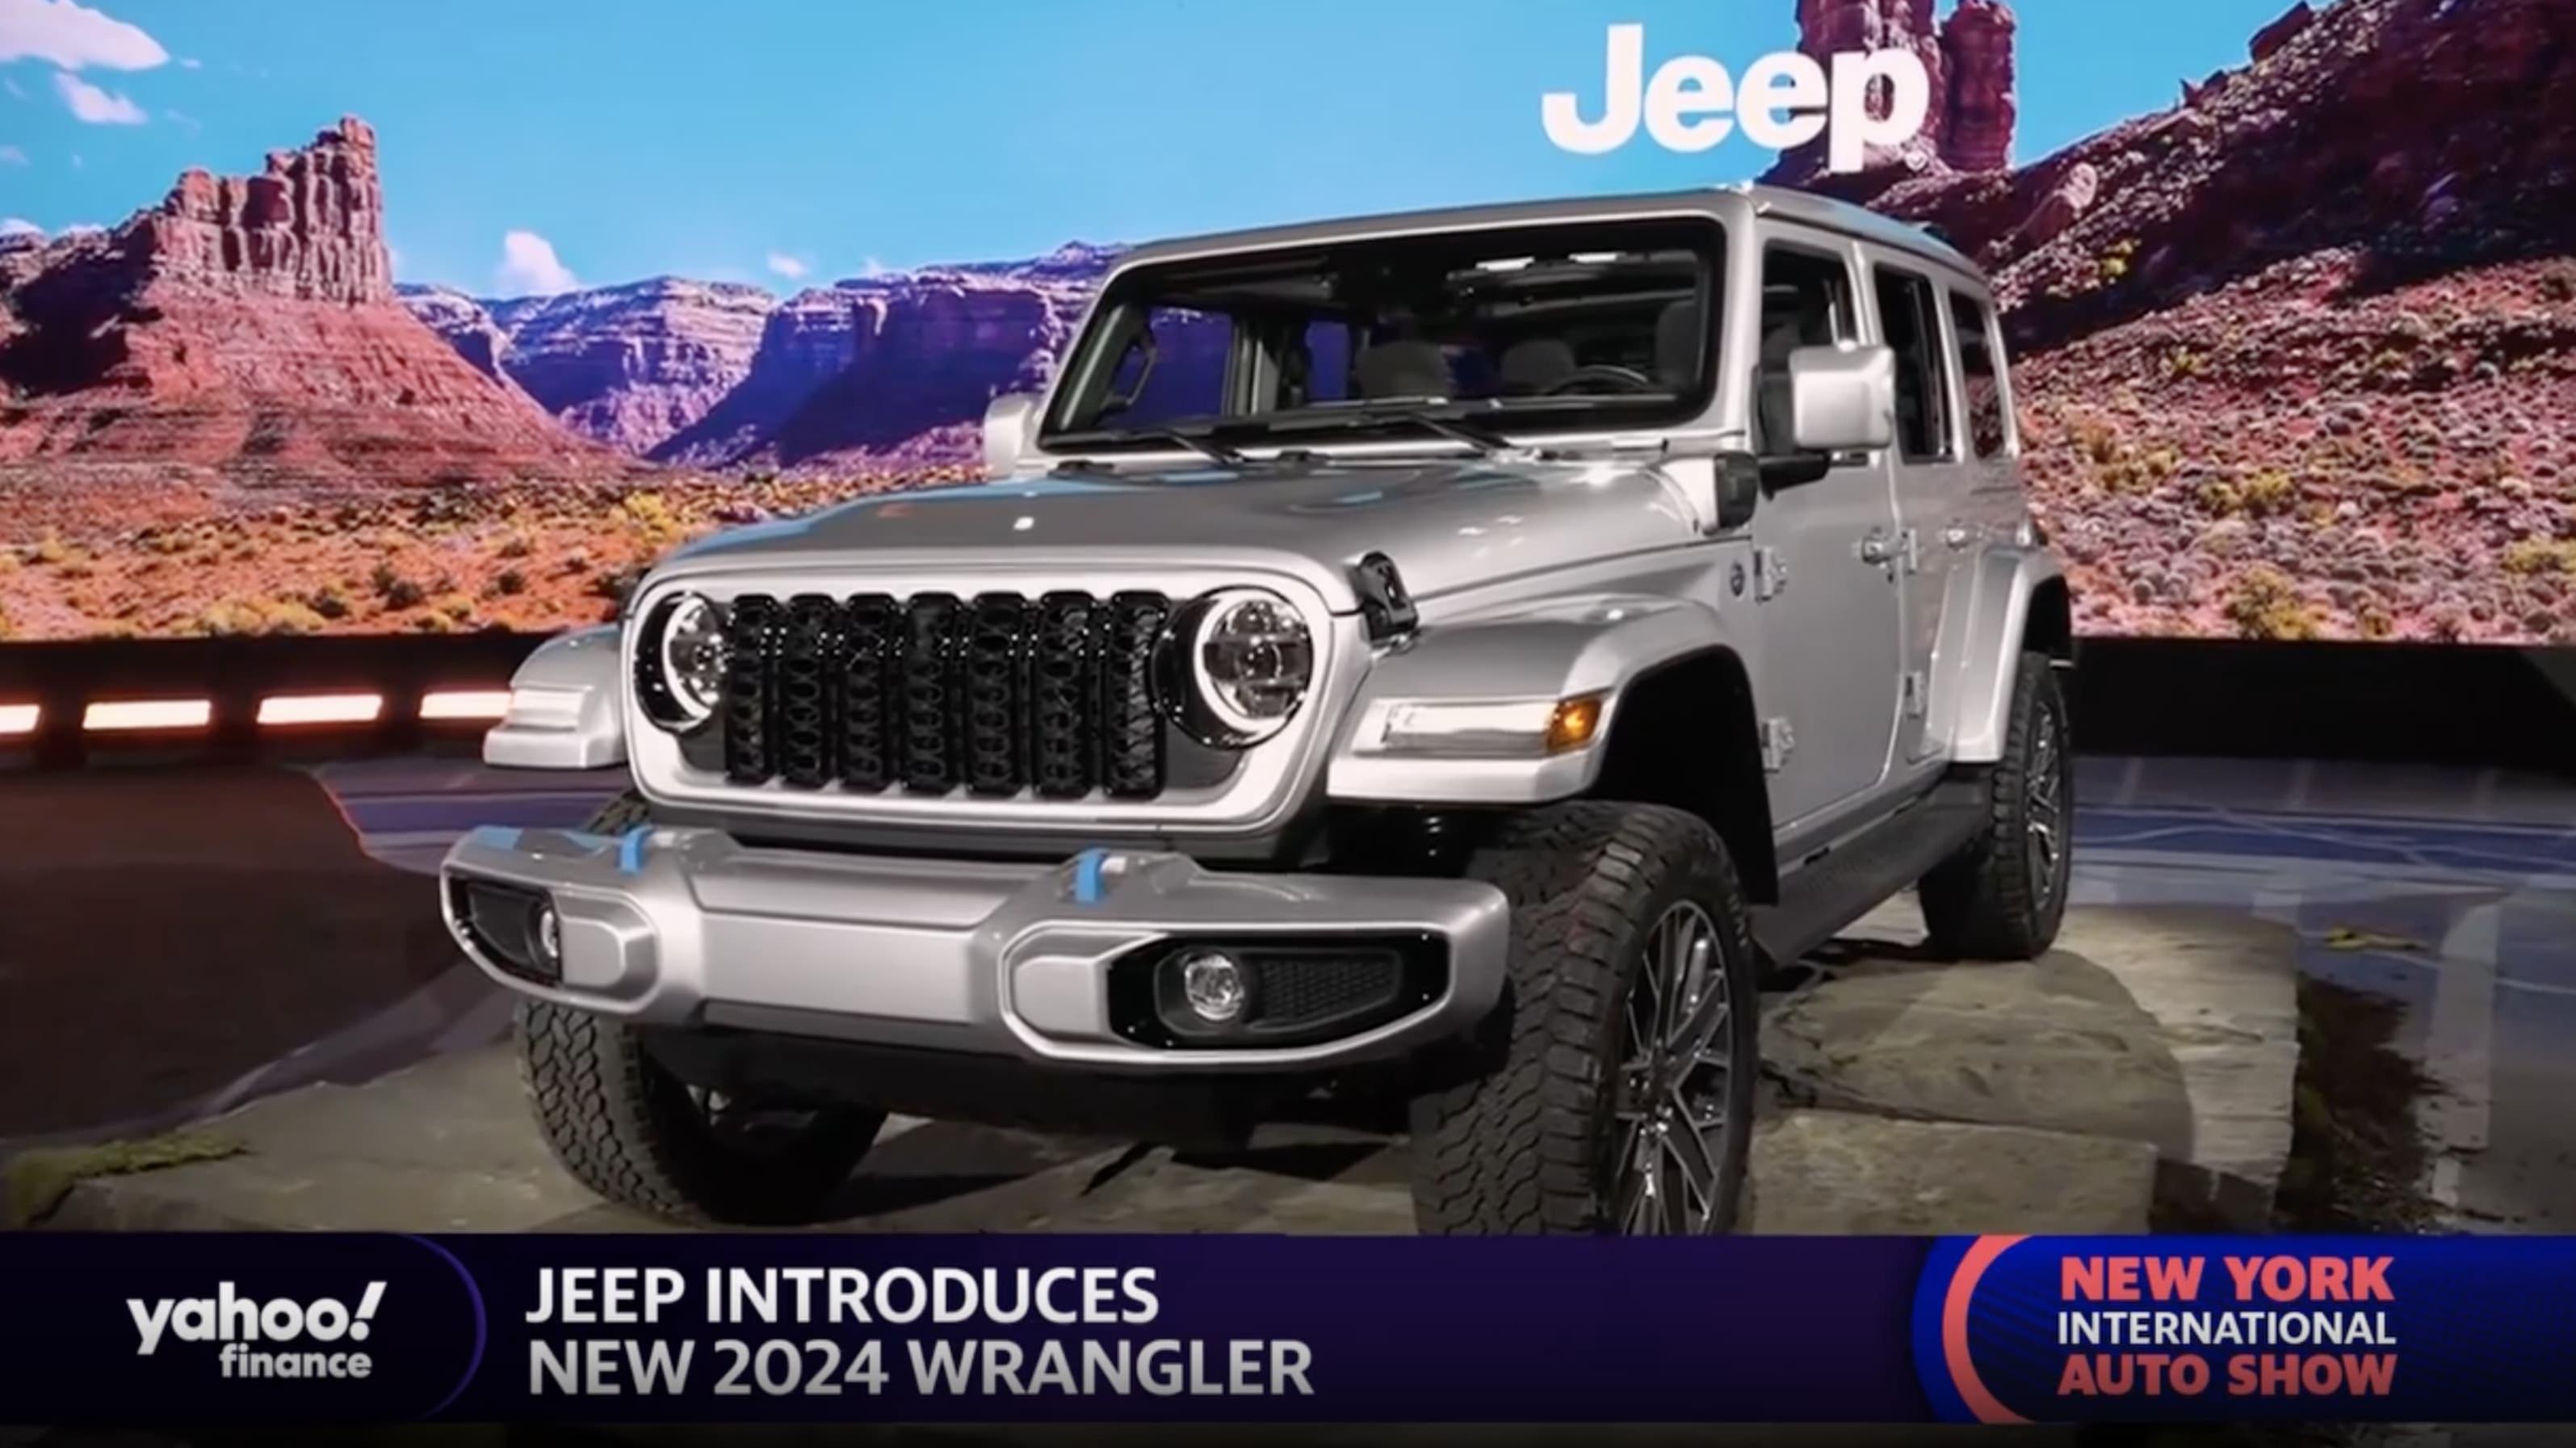 New York Auto Show sees unveils of new Jeep Wrangler, Ford Mustang Dark  Horse